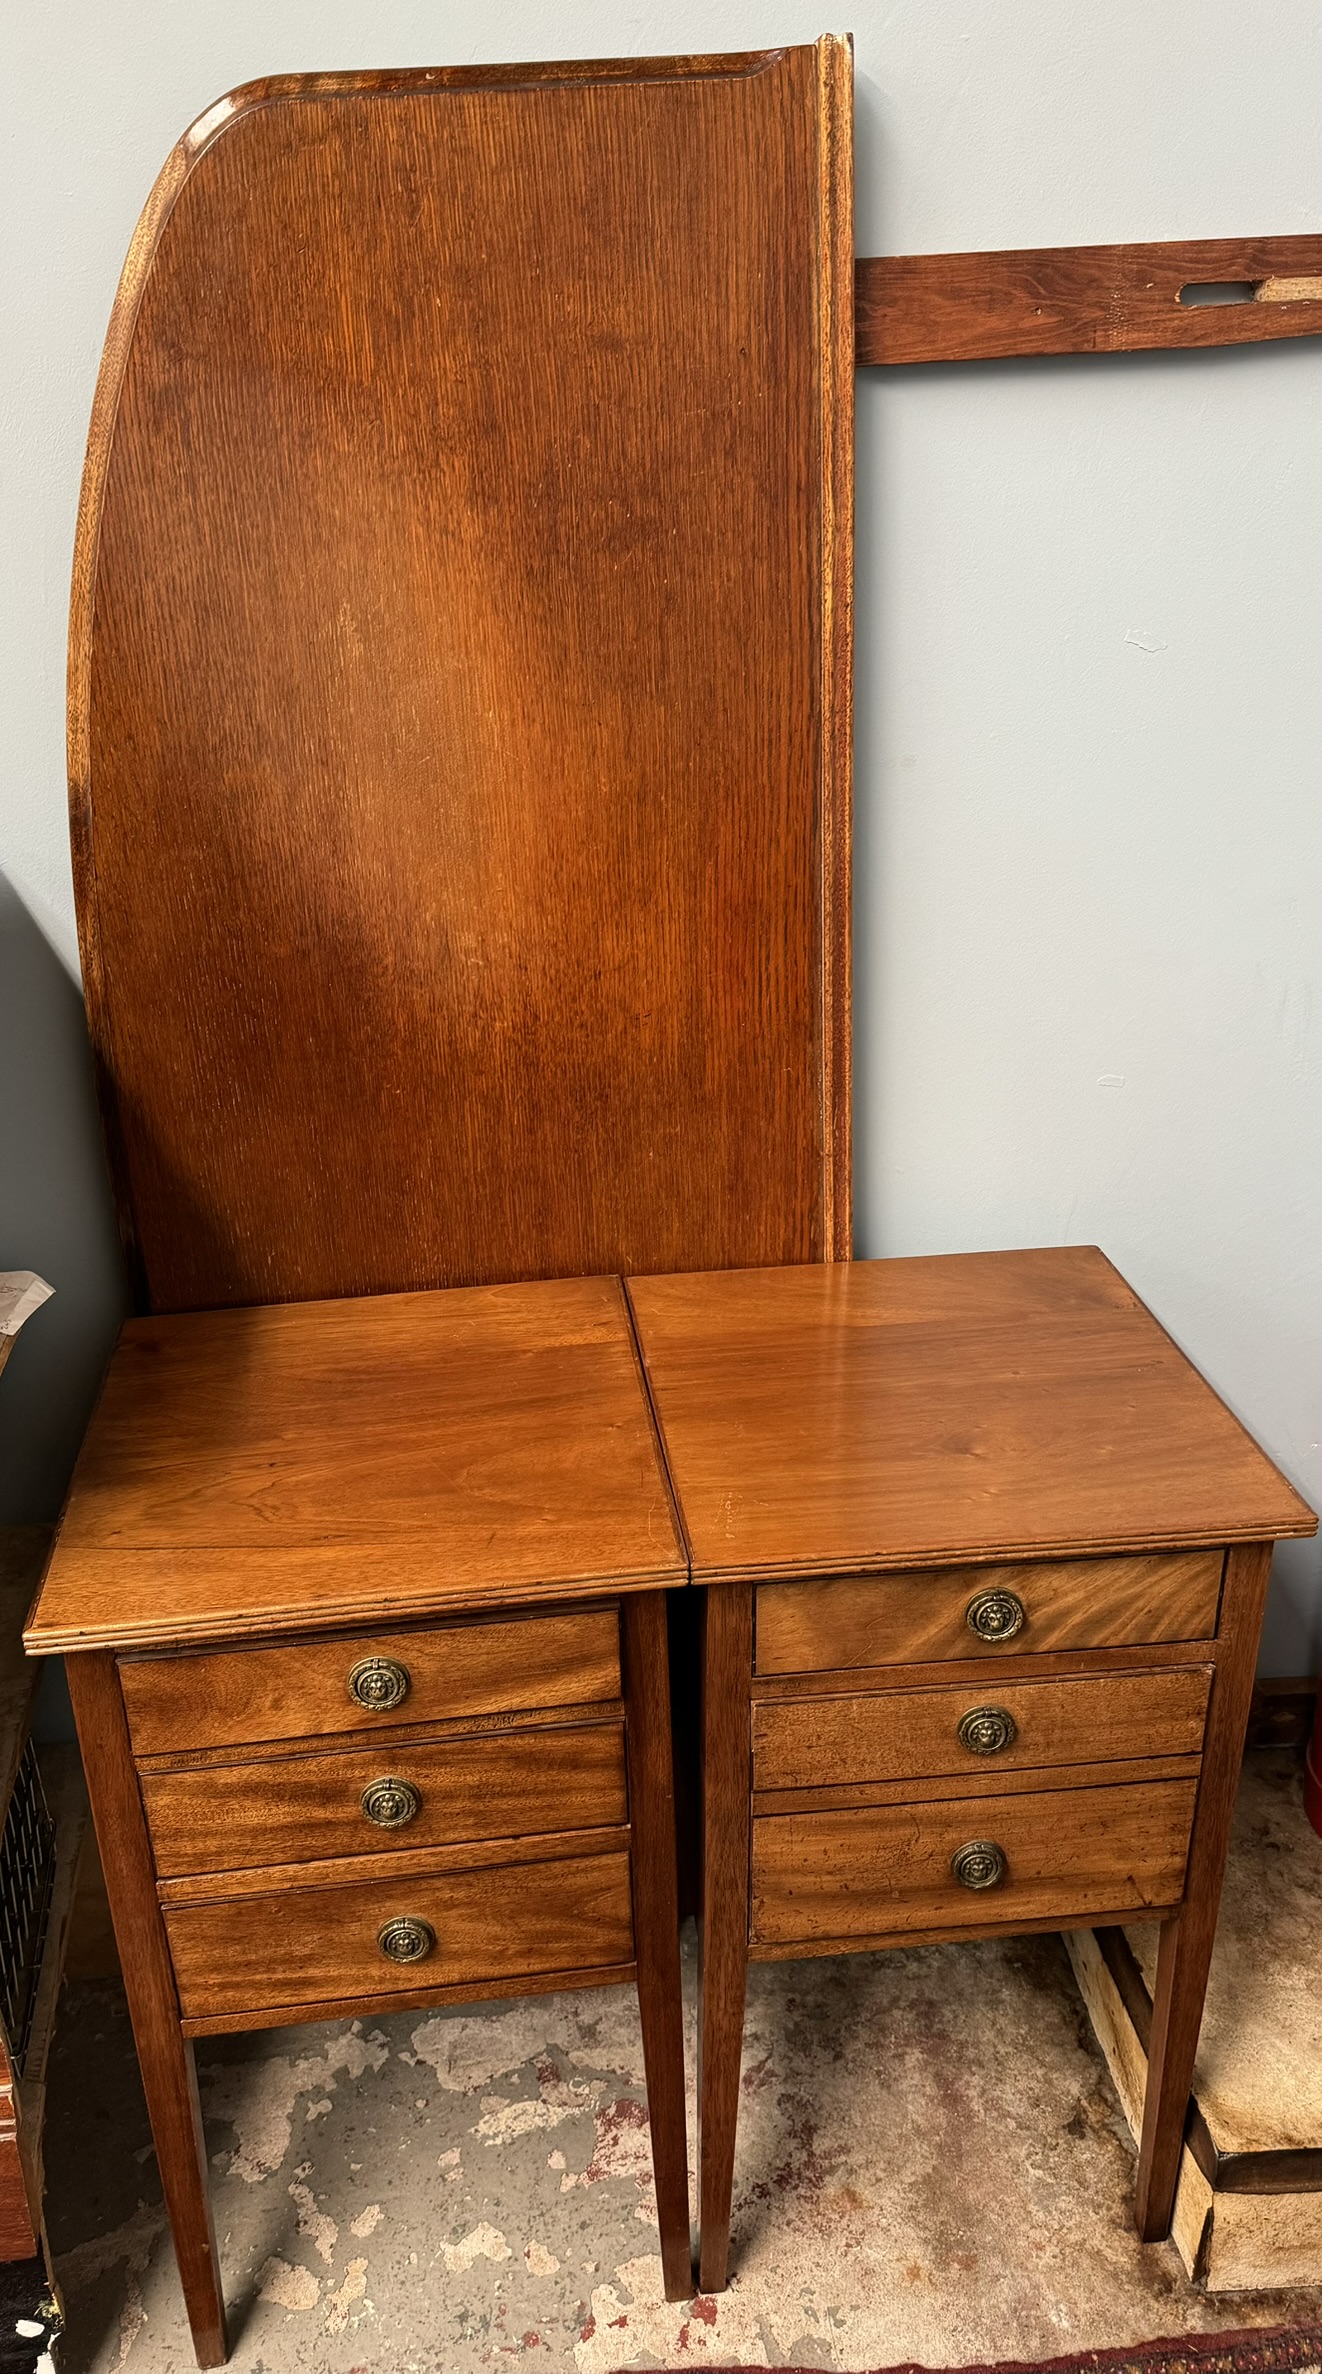 A pair of 19th century mahogany bedside cabinets together with an oak headboard